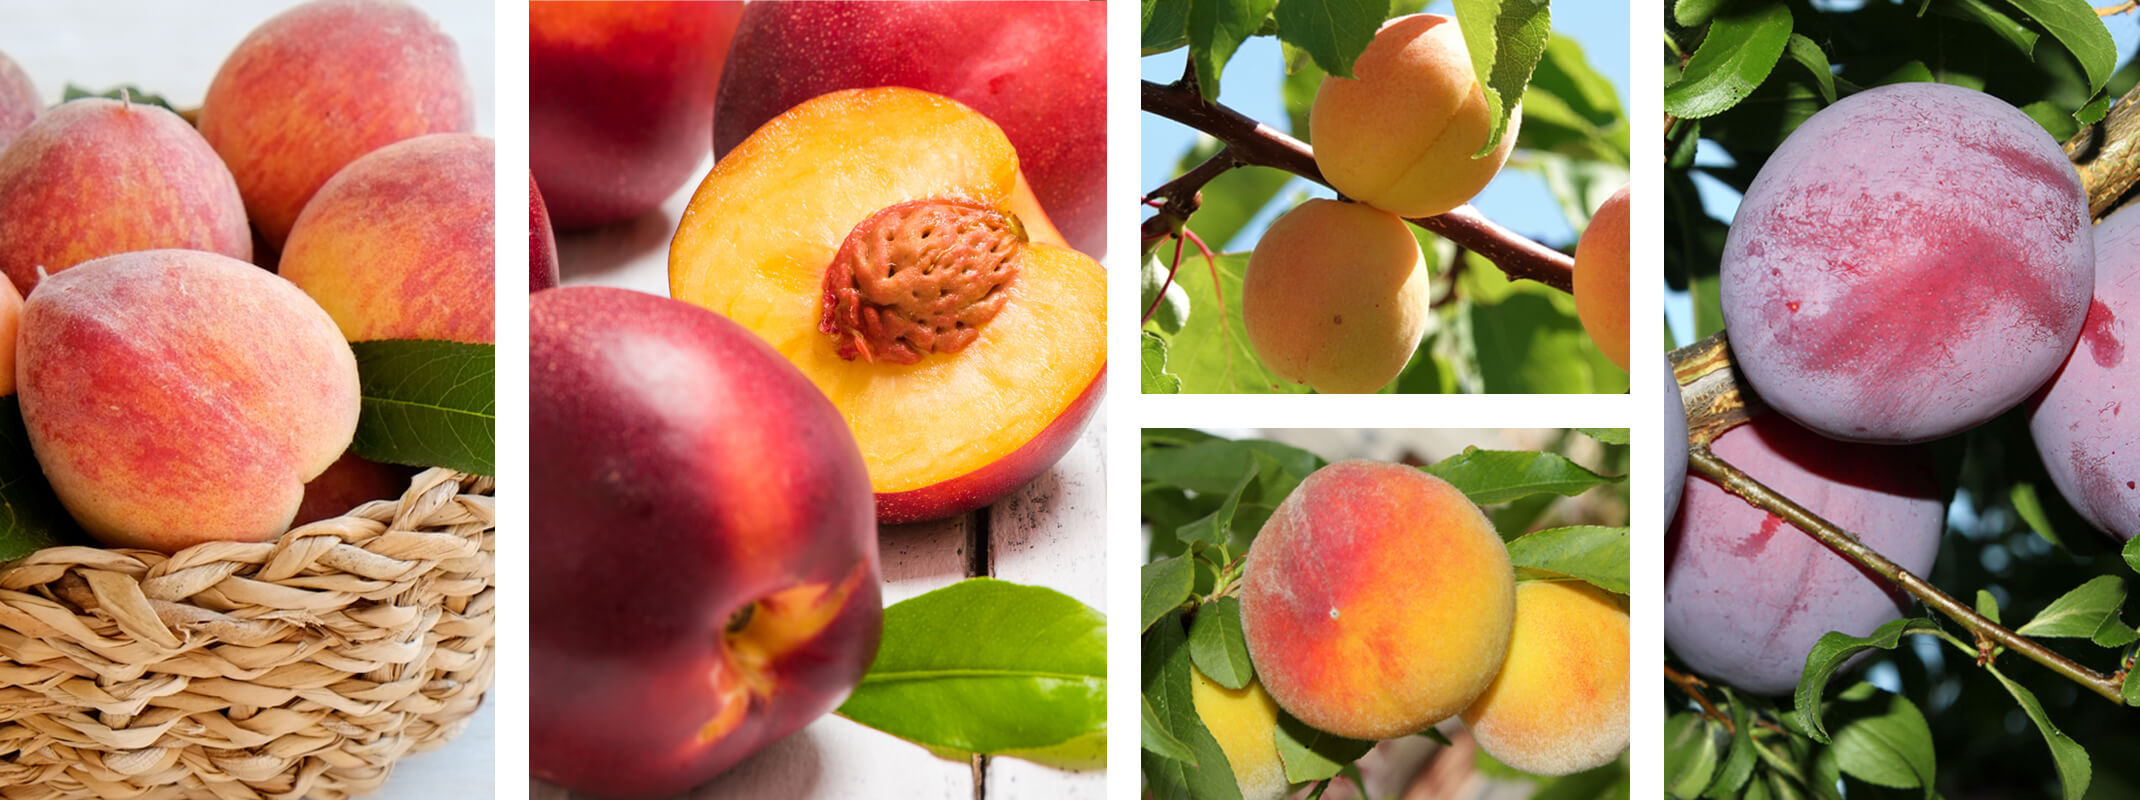 5 different images of fruits that make up the fruit salad fruit tree: peaches, nectarines, apricots and plums